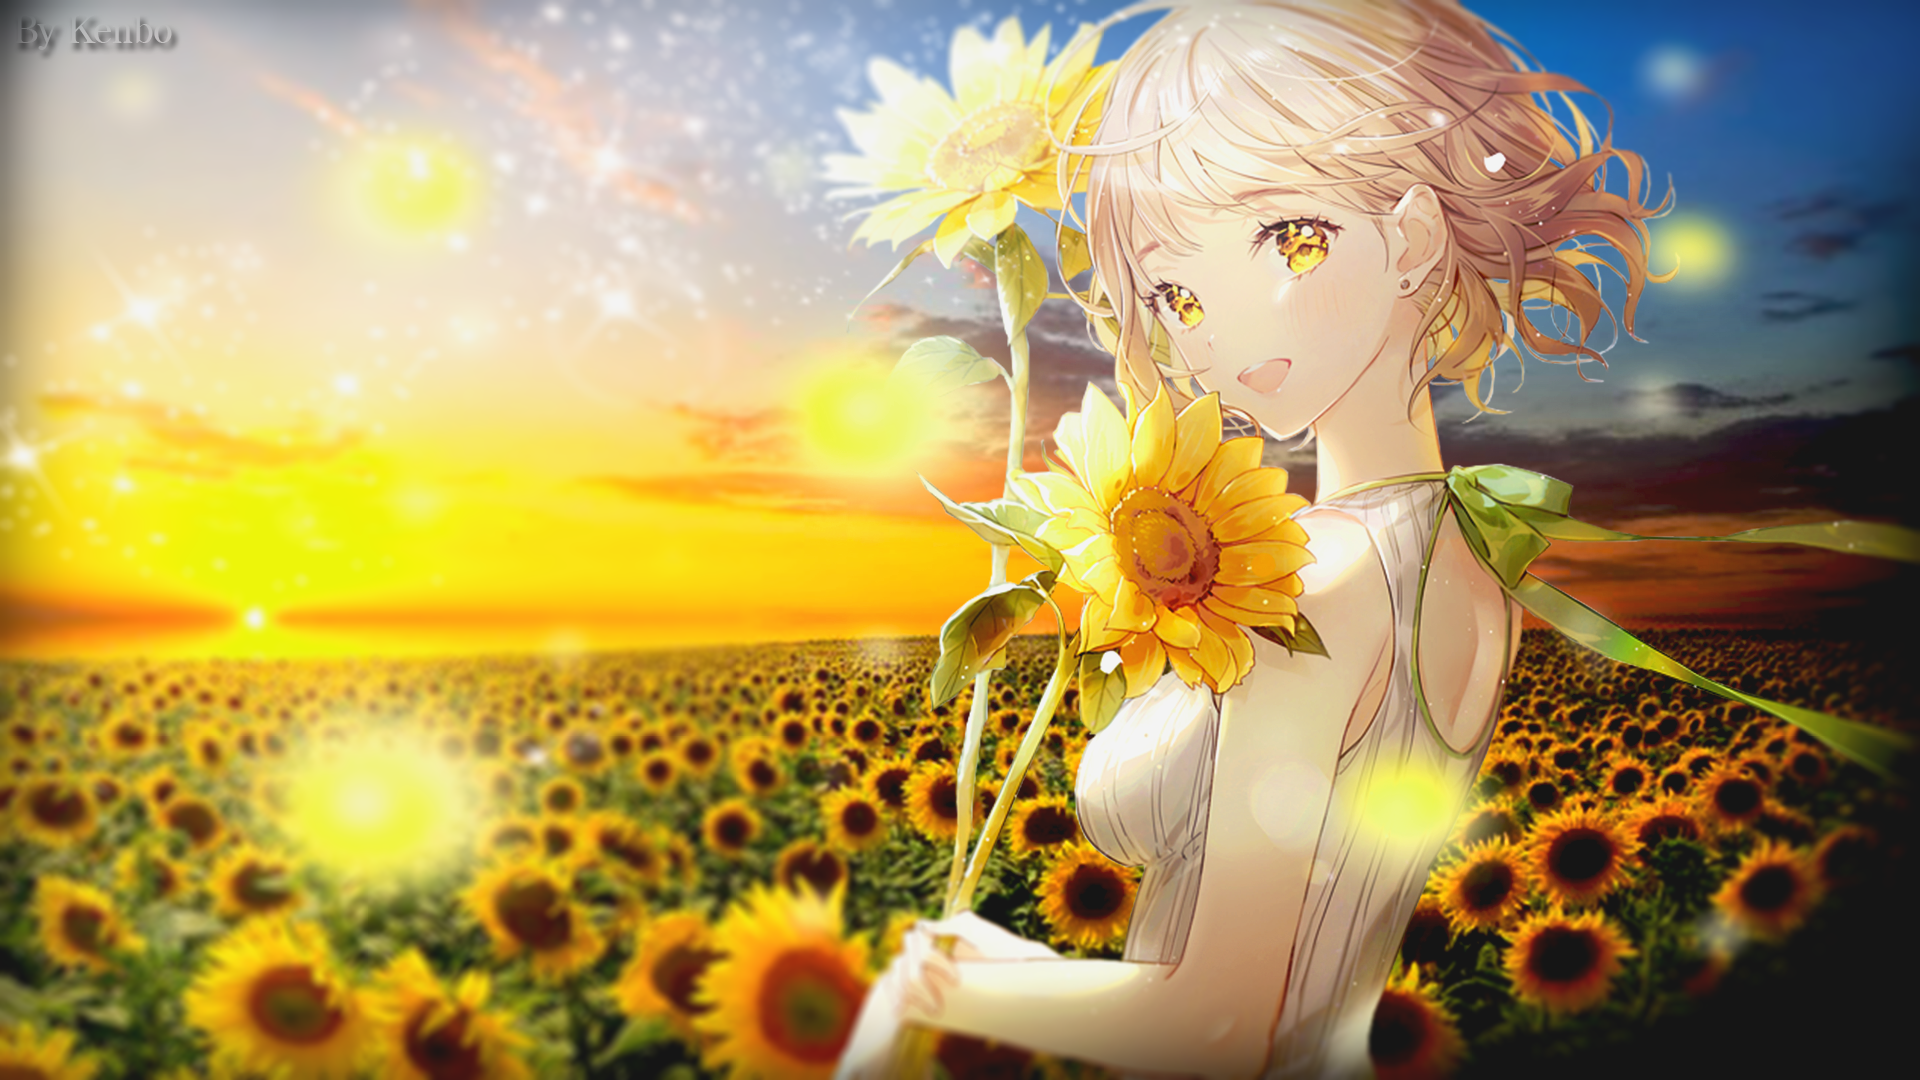 Anime 1920x1080 anime girls sunflowers picture-in-picture